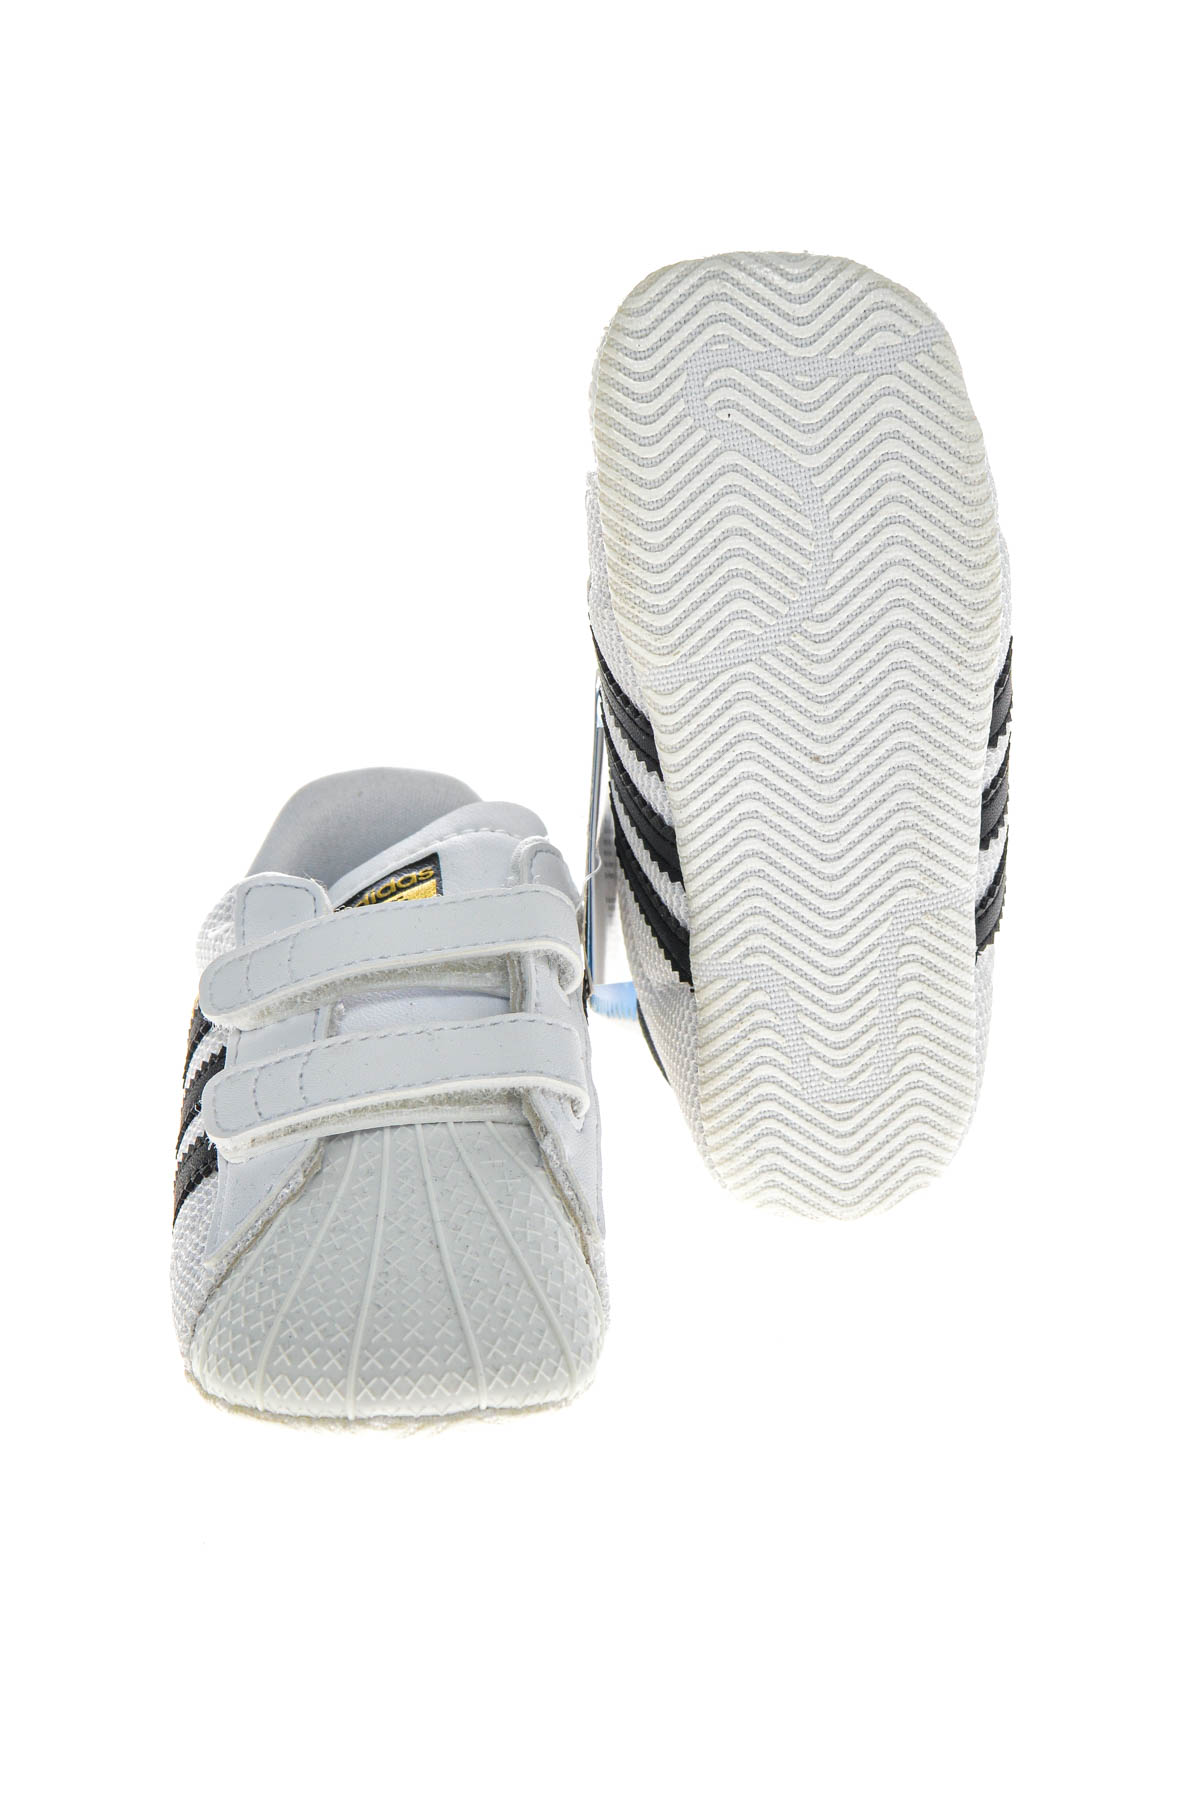 Baby boots - Adidas - 3